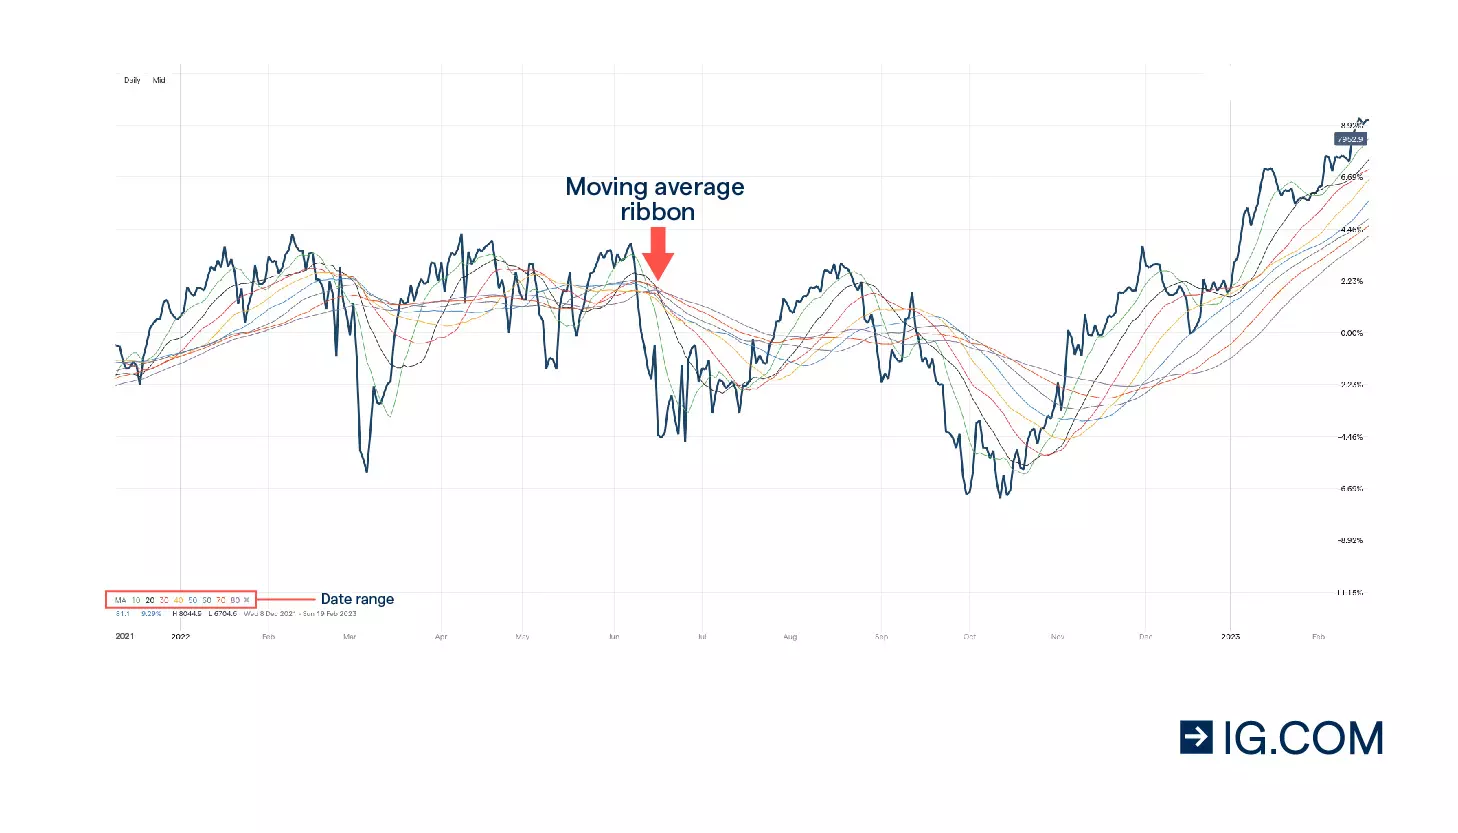 Trading chart of the FTSE 100 displaying several price points in a span starting from 8 December 2021 to 16 February 2023 including moving average ribbons set at 10-period intervals, starting from 10-, 20-, 30-, 40-, 50-, 60-, 70- to 80-days period range.